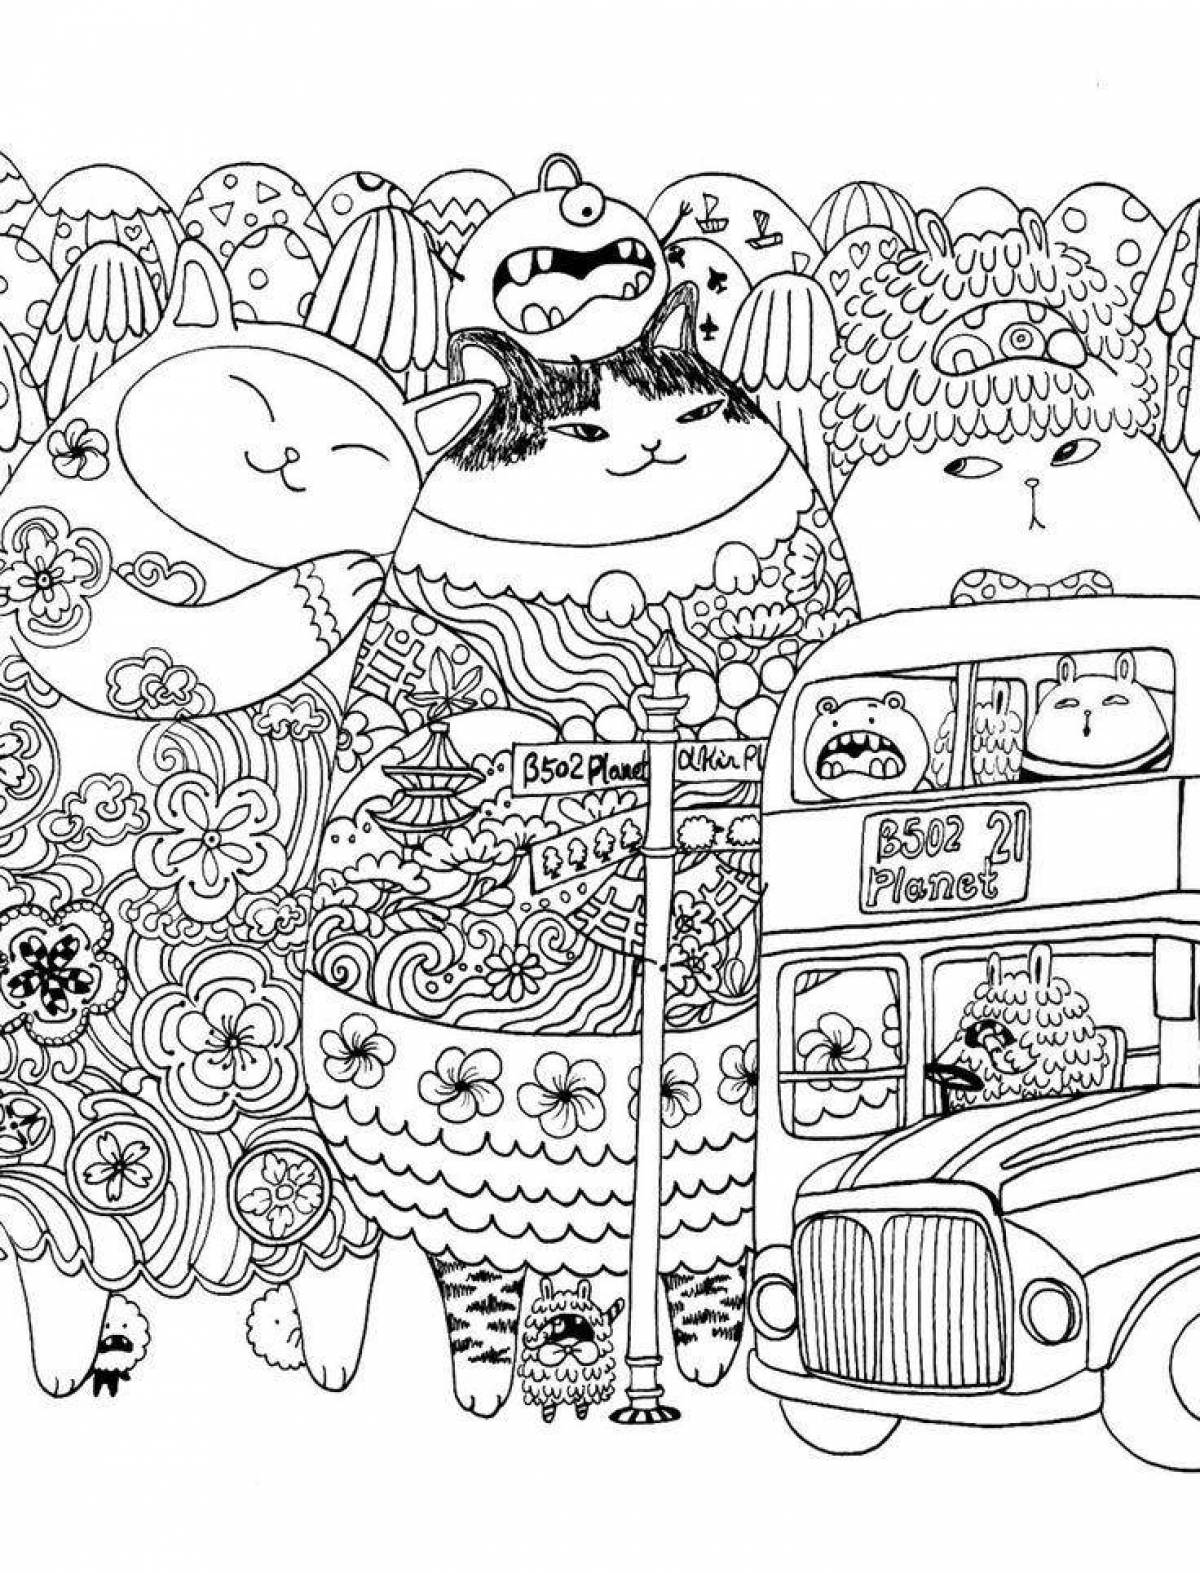 Million cats animated coloring page